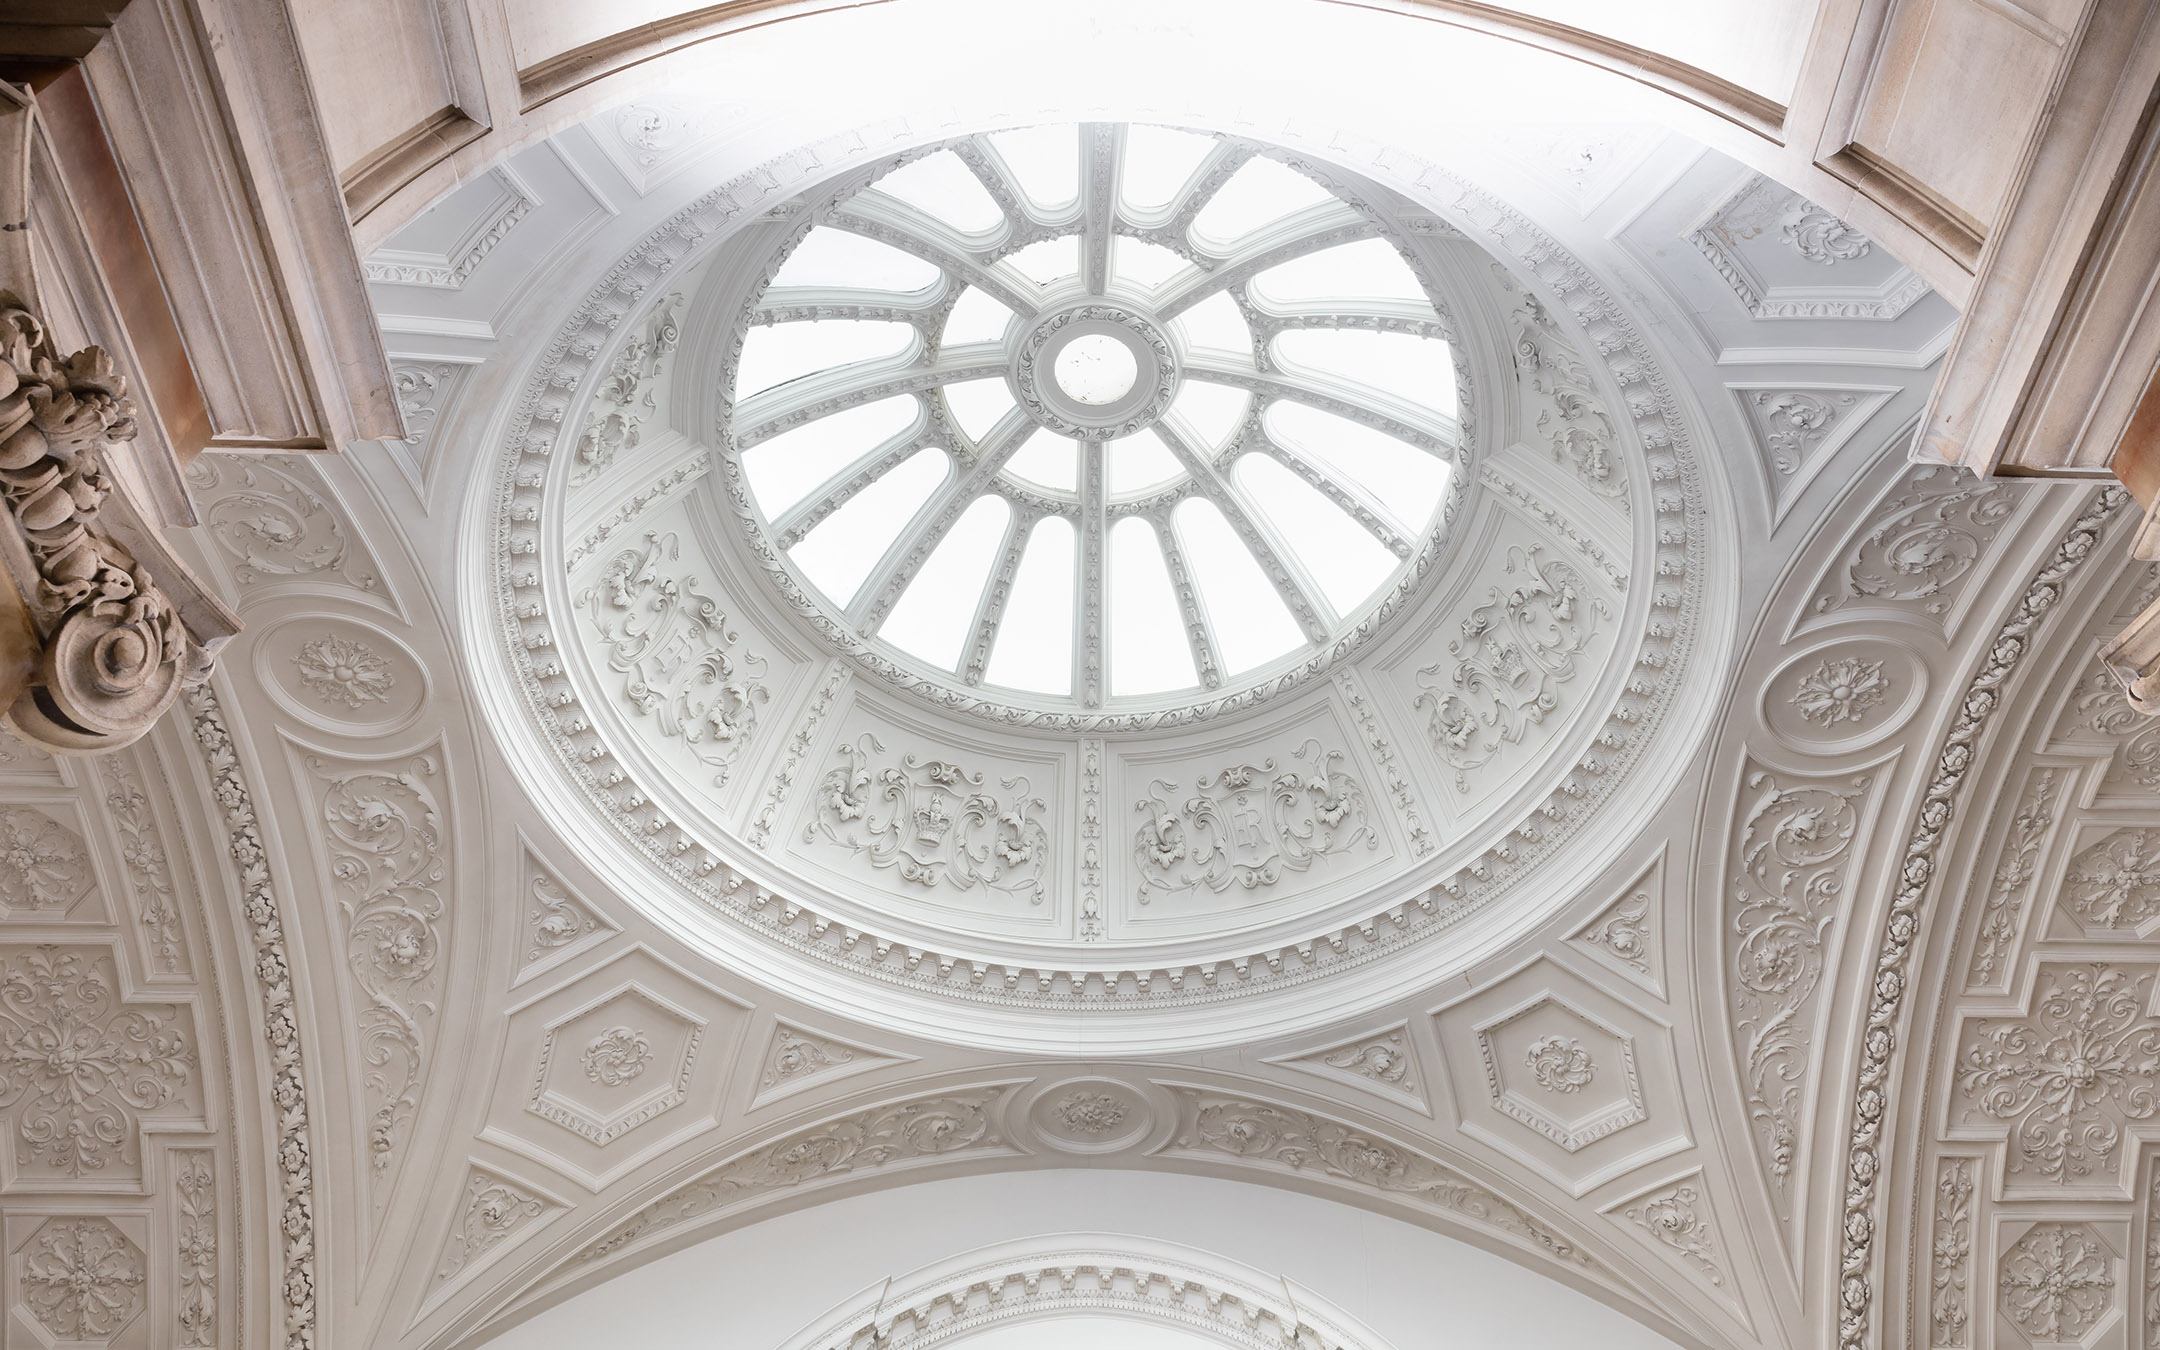 Dome ceiling - The OWO - grade II listed building